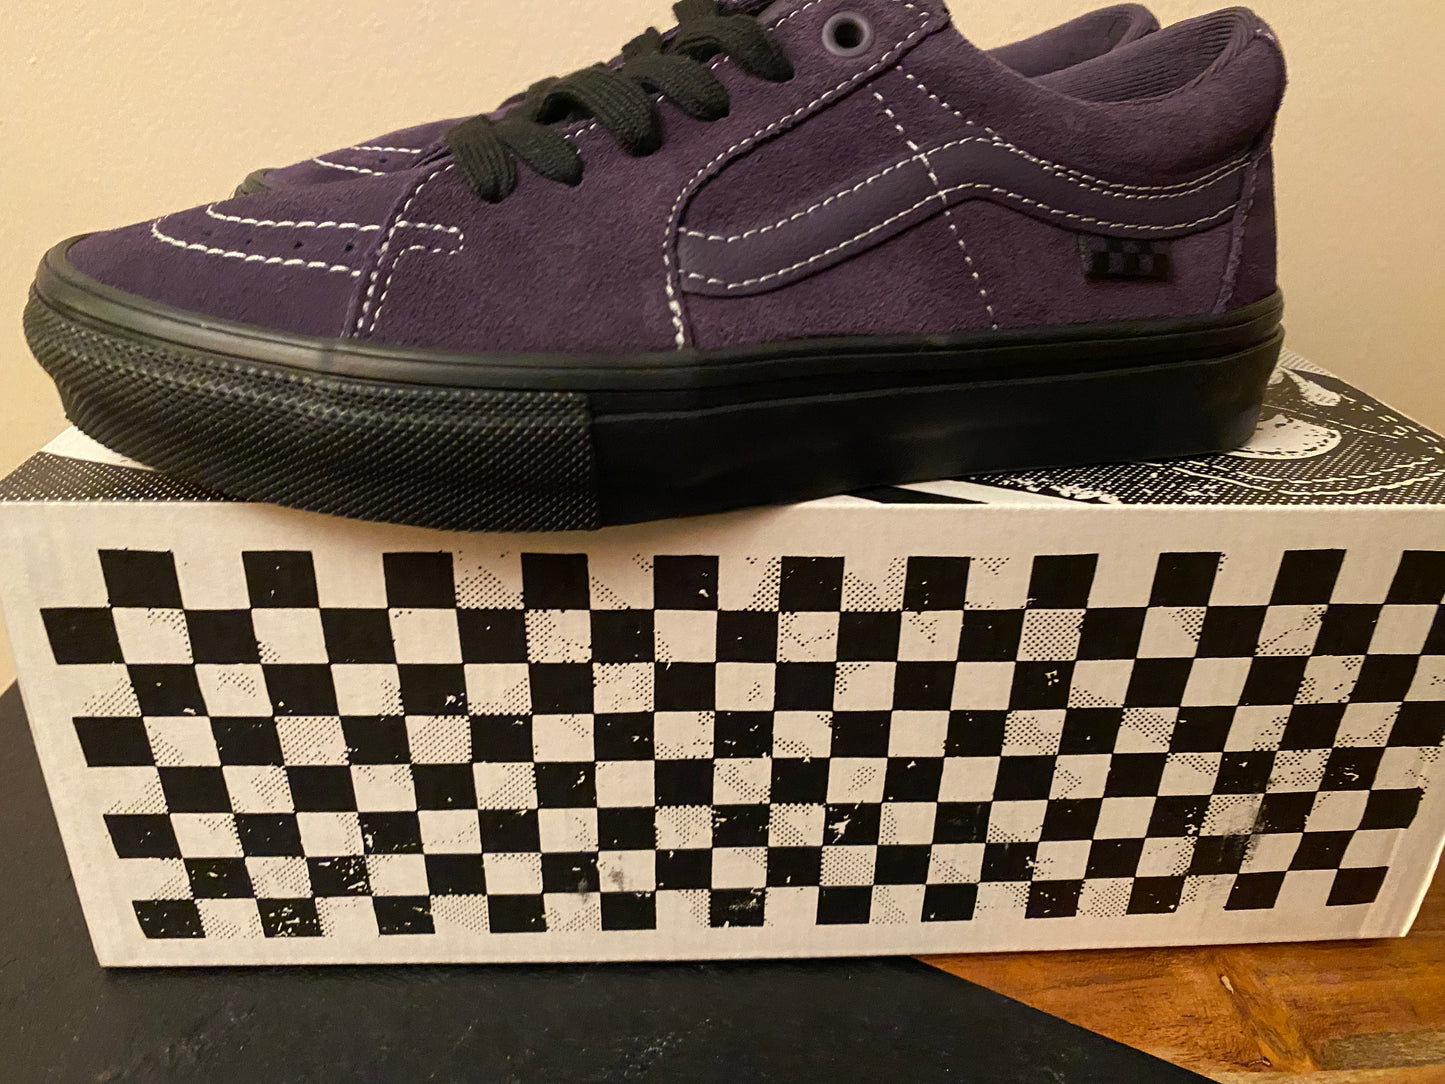 Skate Sk8 Low Shoe Dk.Purp/Blk(size options listed)